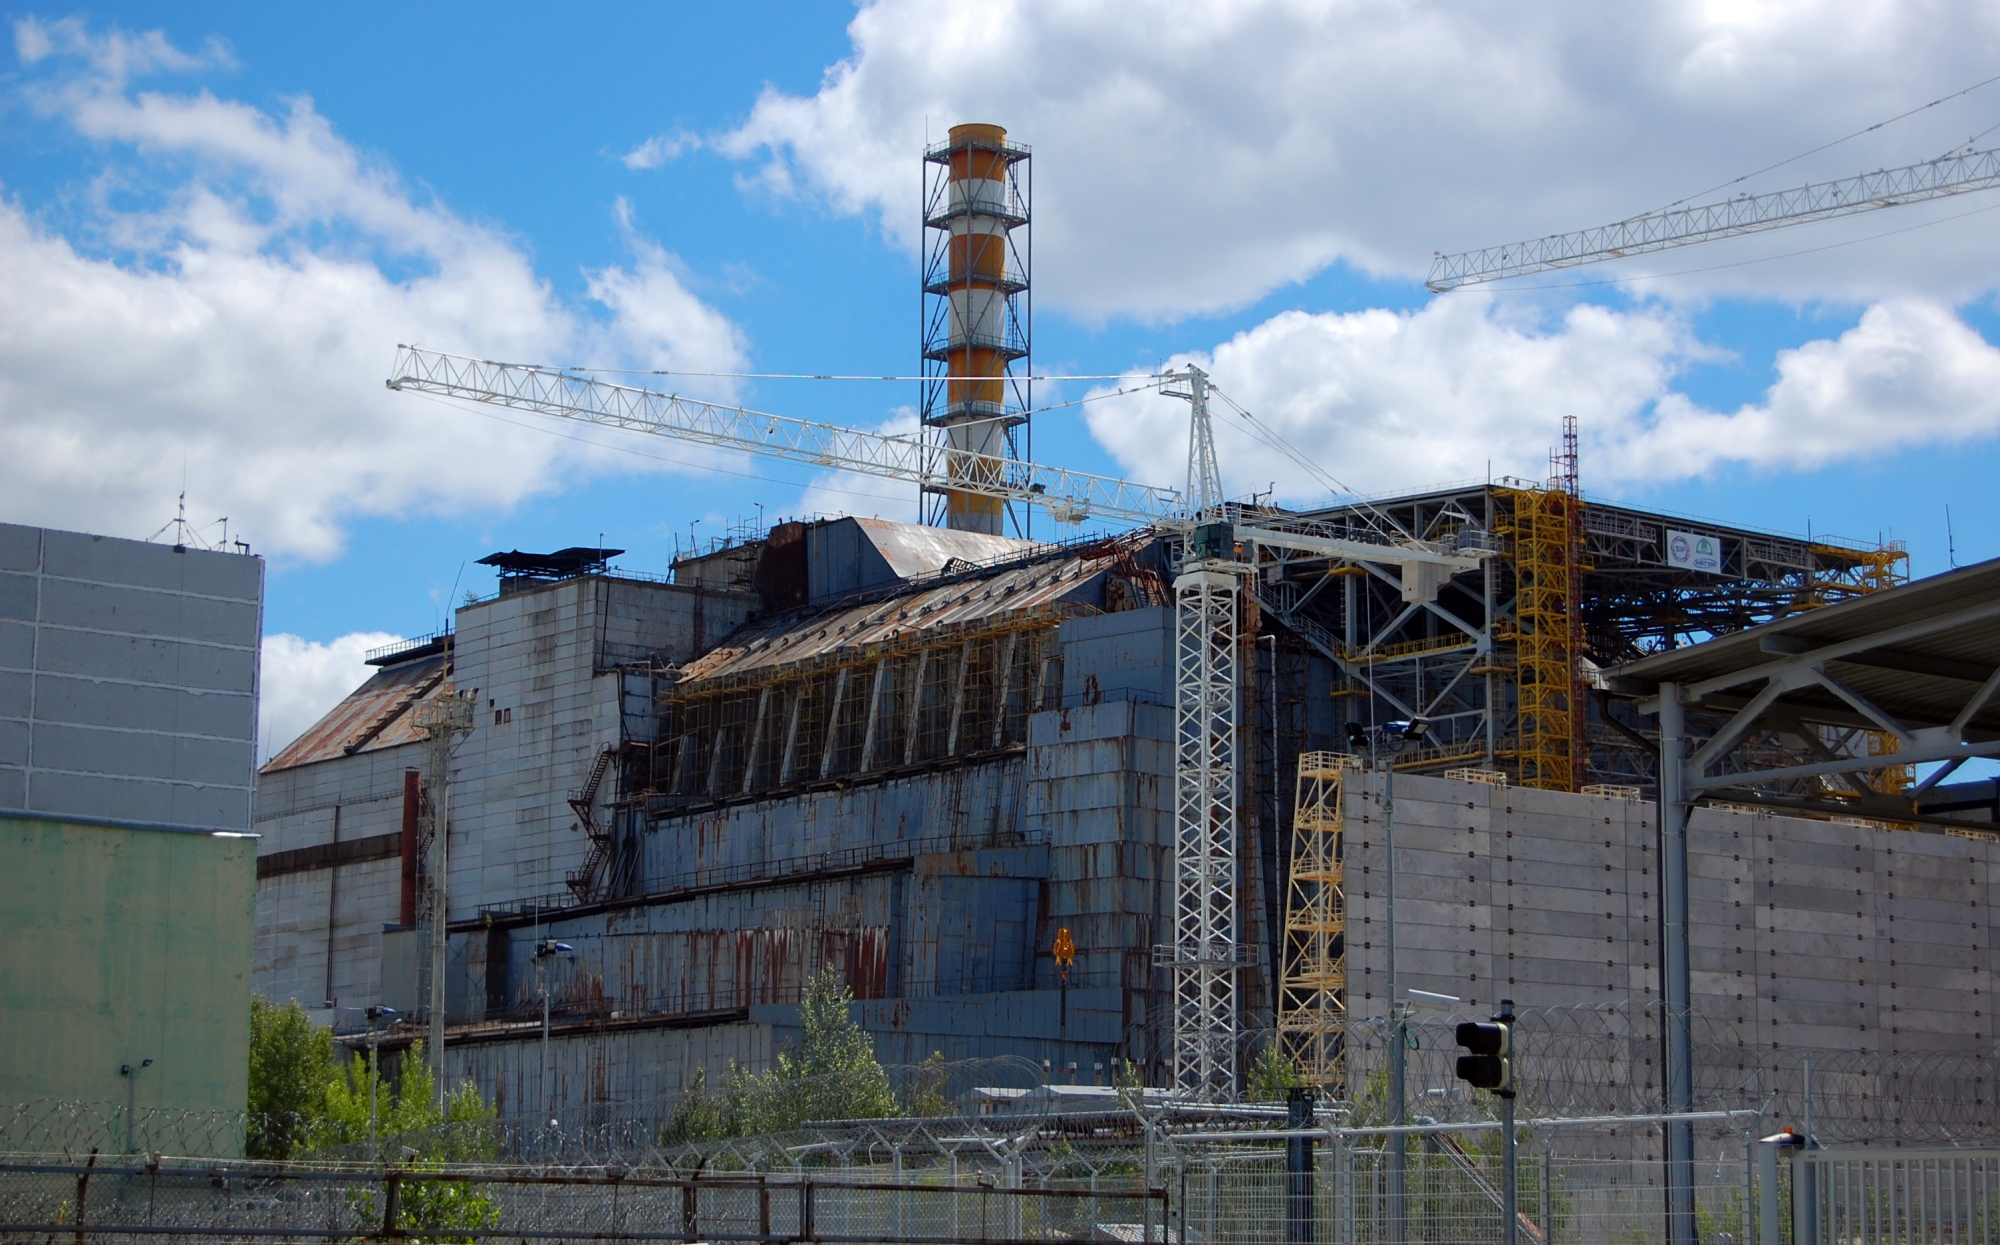 Visiting Chernobyl includes seeing the destroyed nuclear reactor.